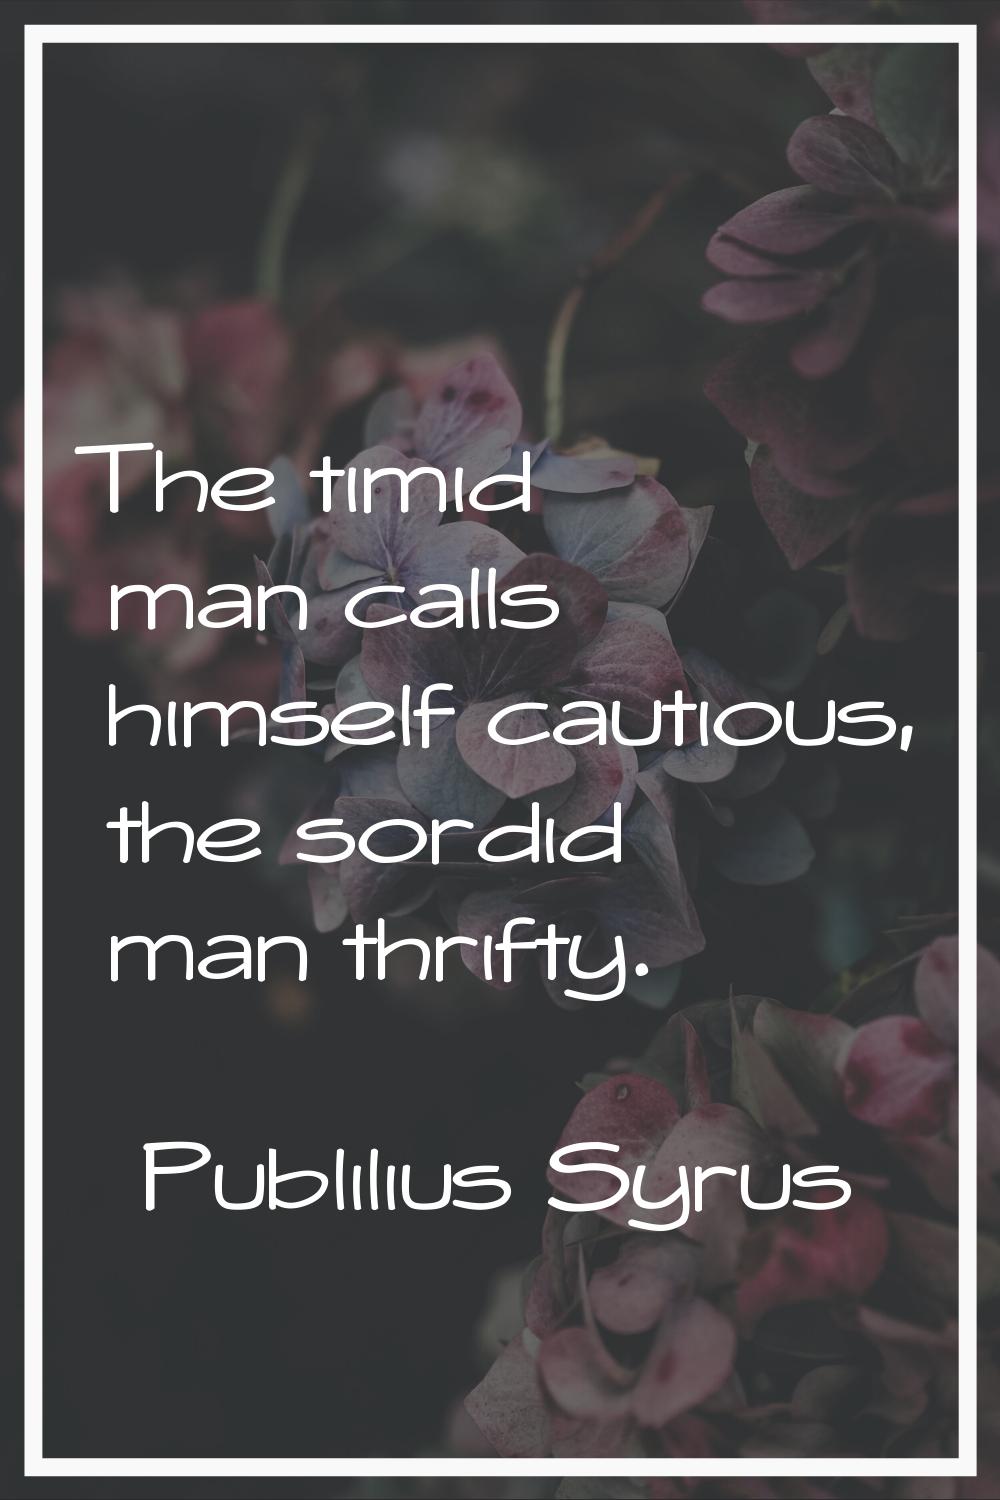 The timid man calls himself cautious, the sordid man thrifty.